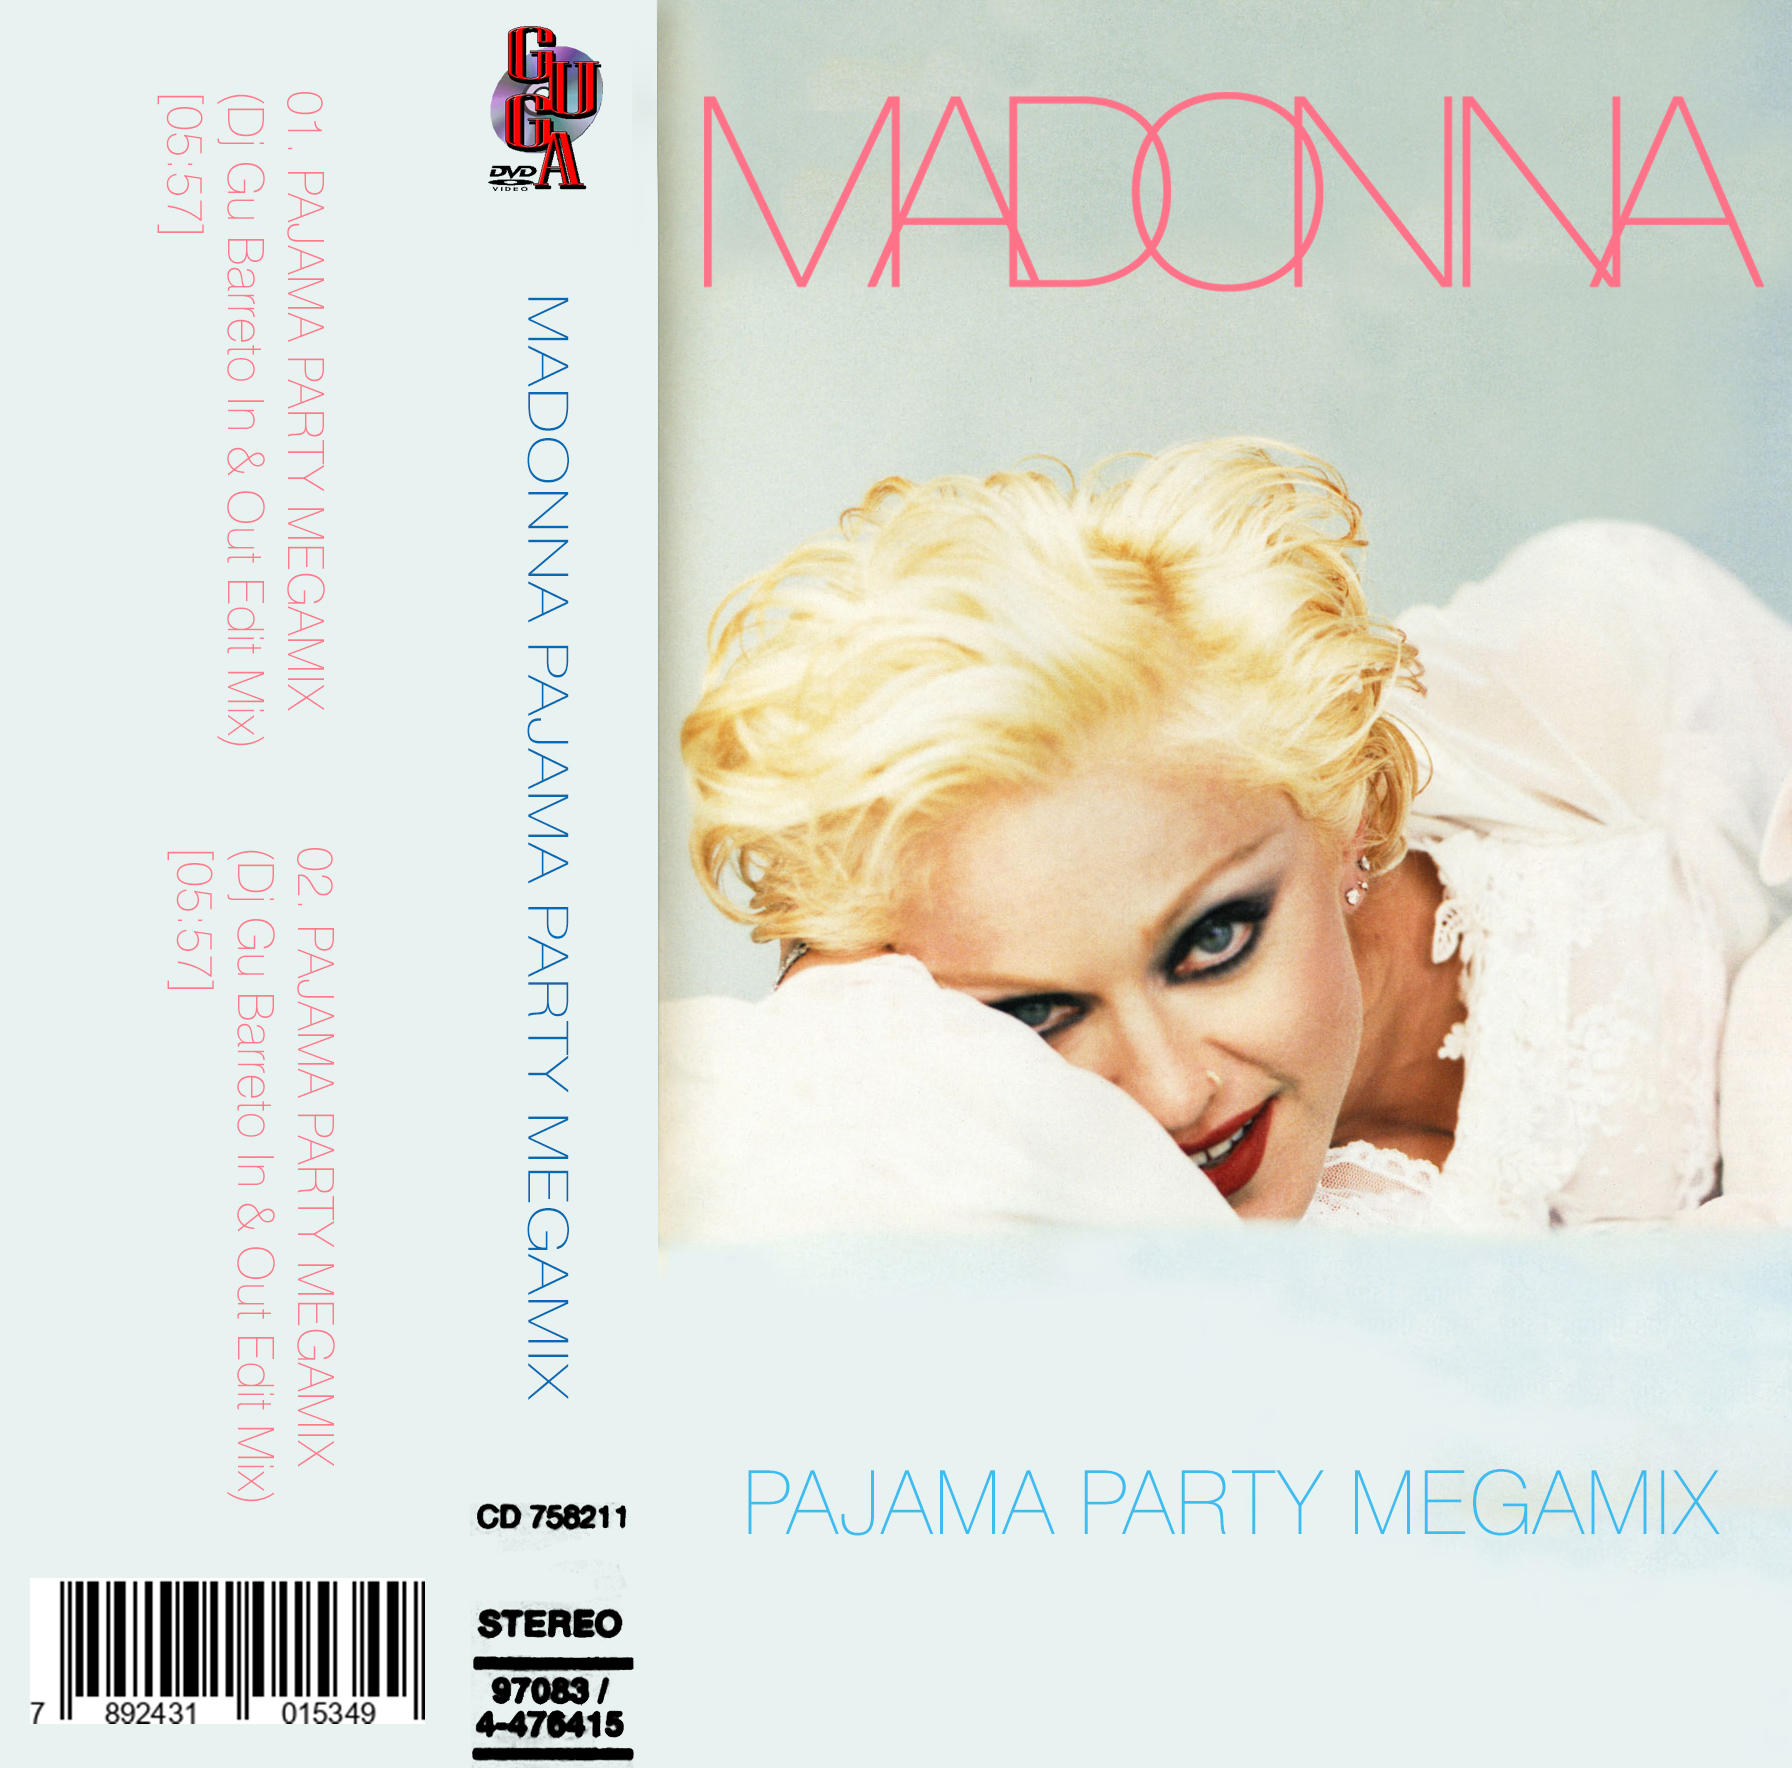 Madonna Coaster set Album covers new Official 4 pack 